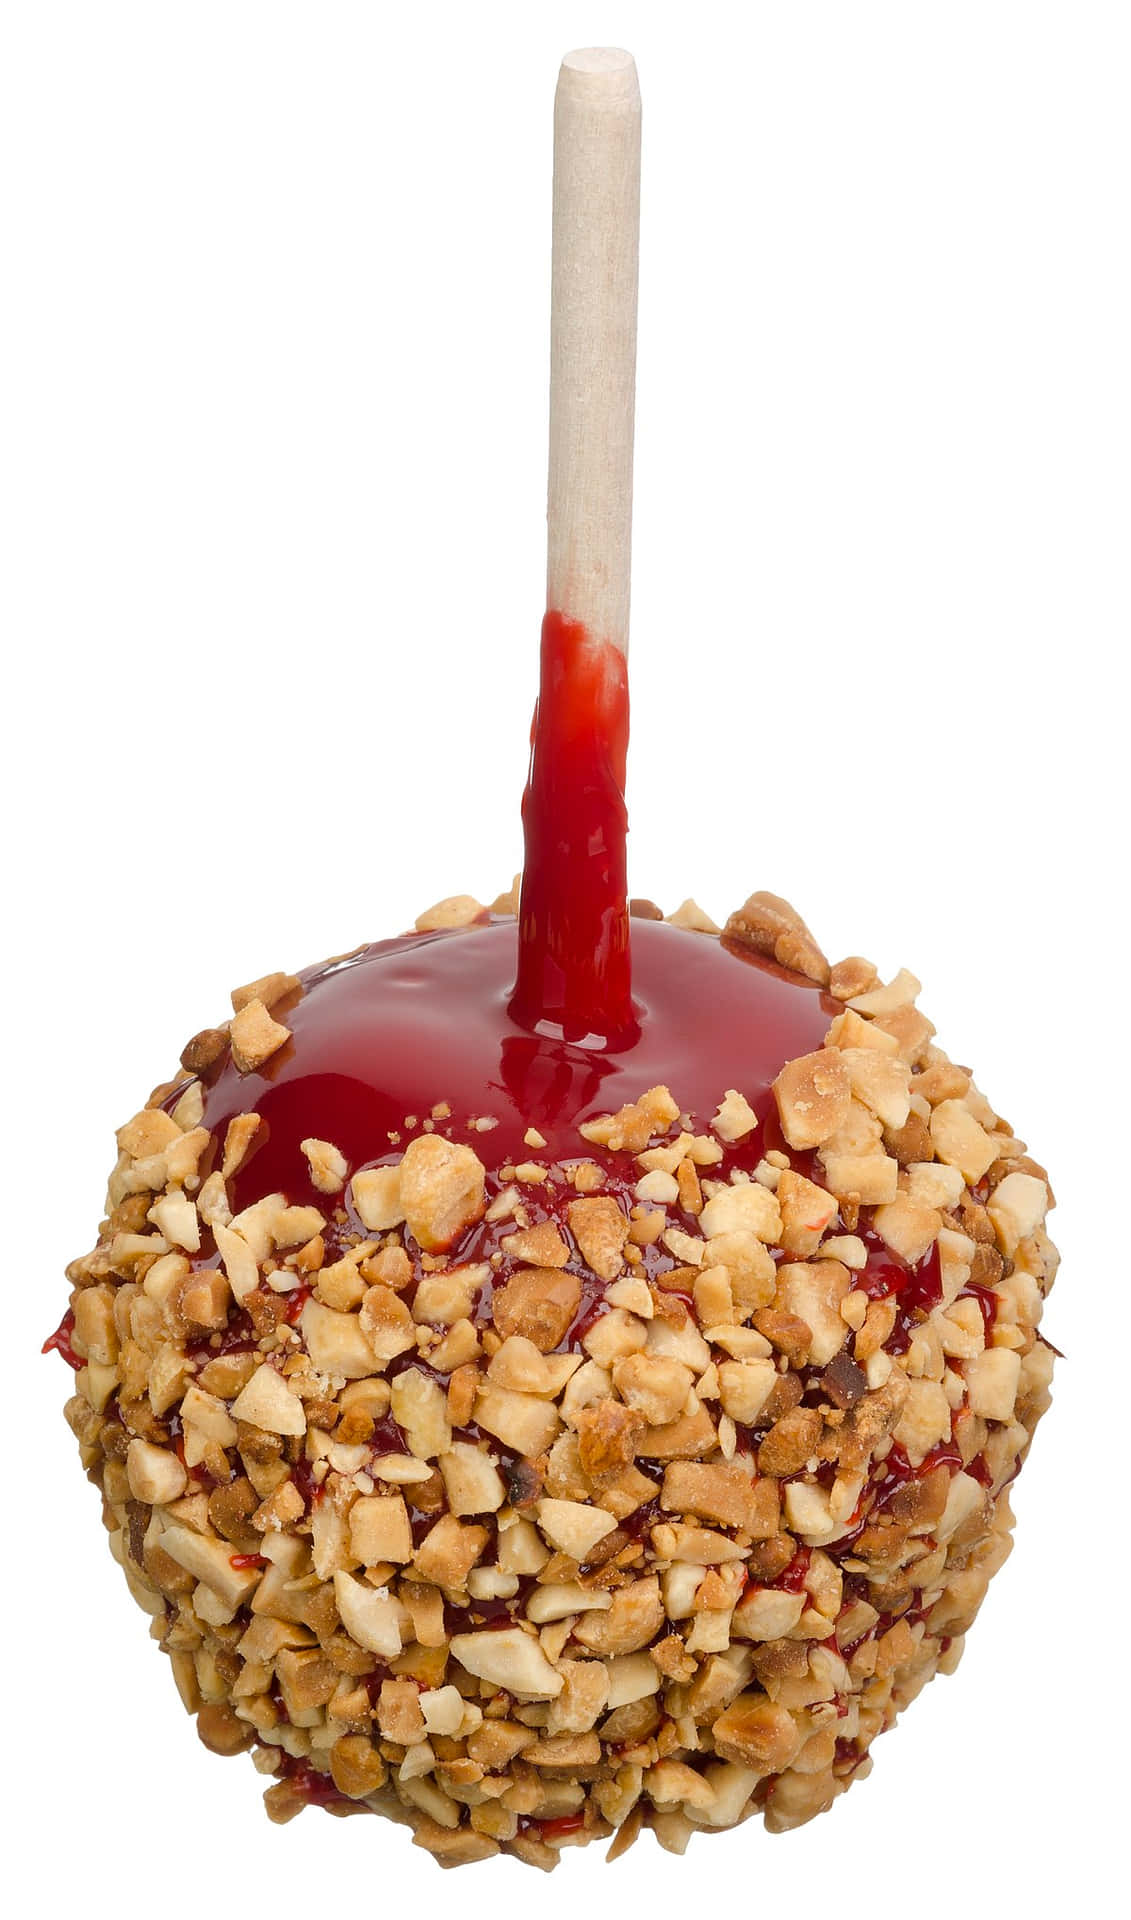 Irresistible Candy Apples Wallpaper